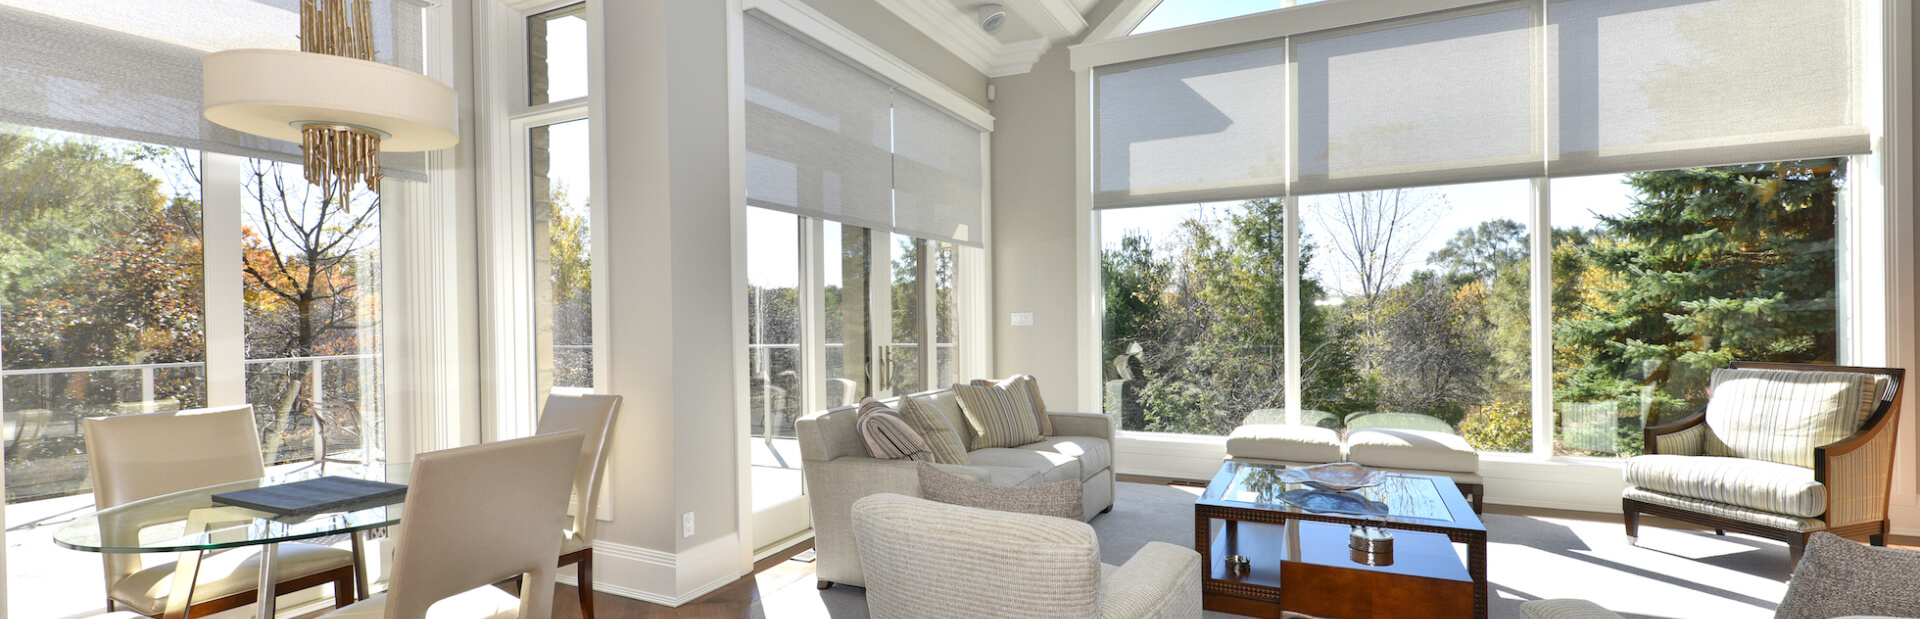 Living Room with big windows and Big Shades